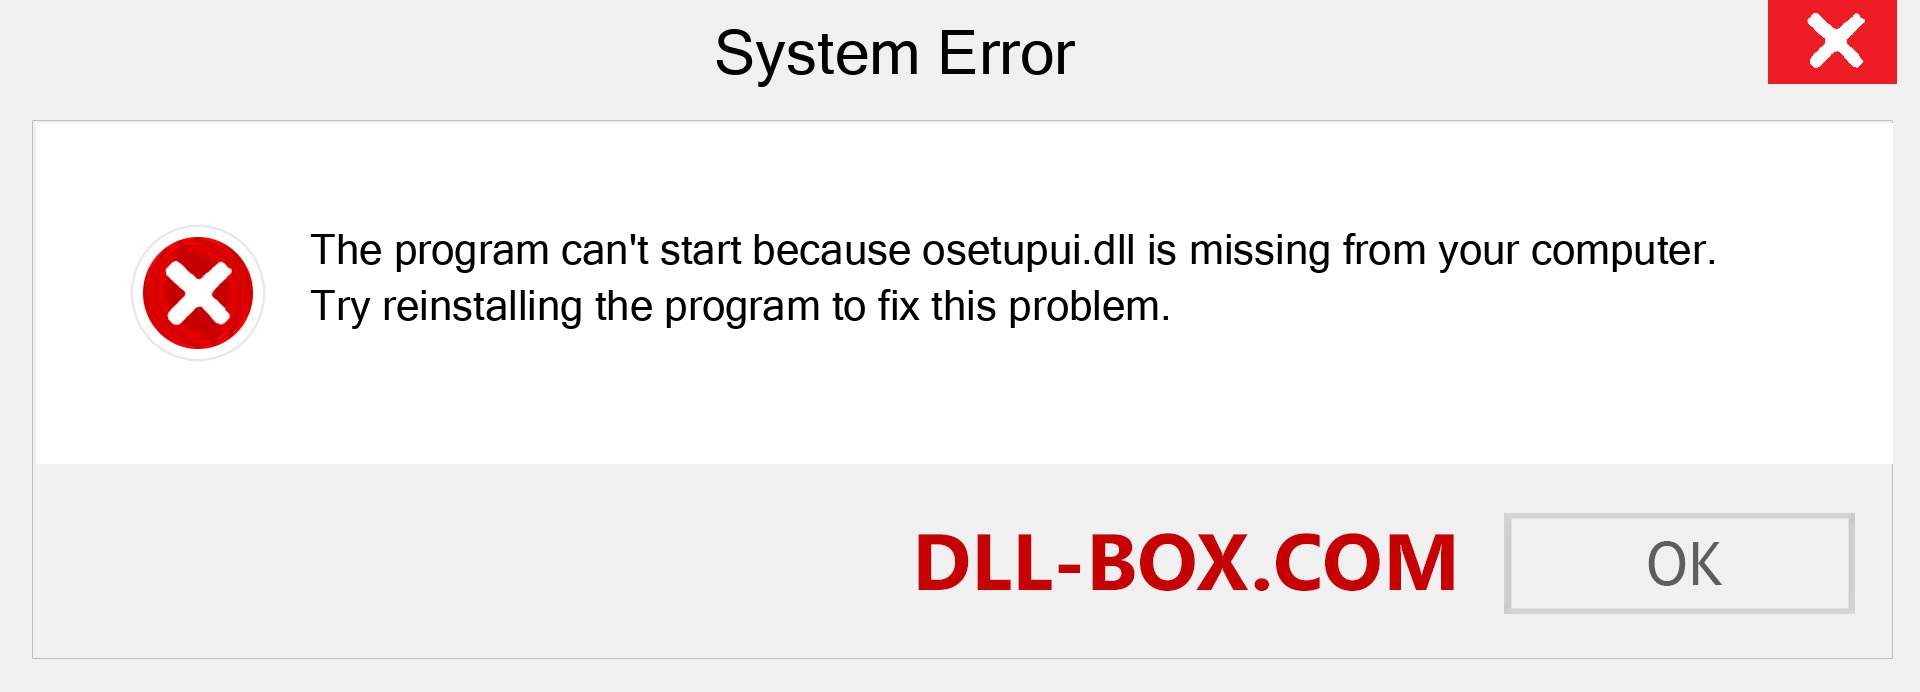  osetupui.dll file is missing?. Download for Windows 7, 8, 10 - Fix  osetupui dll Missing Error on Windows, photos, images